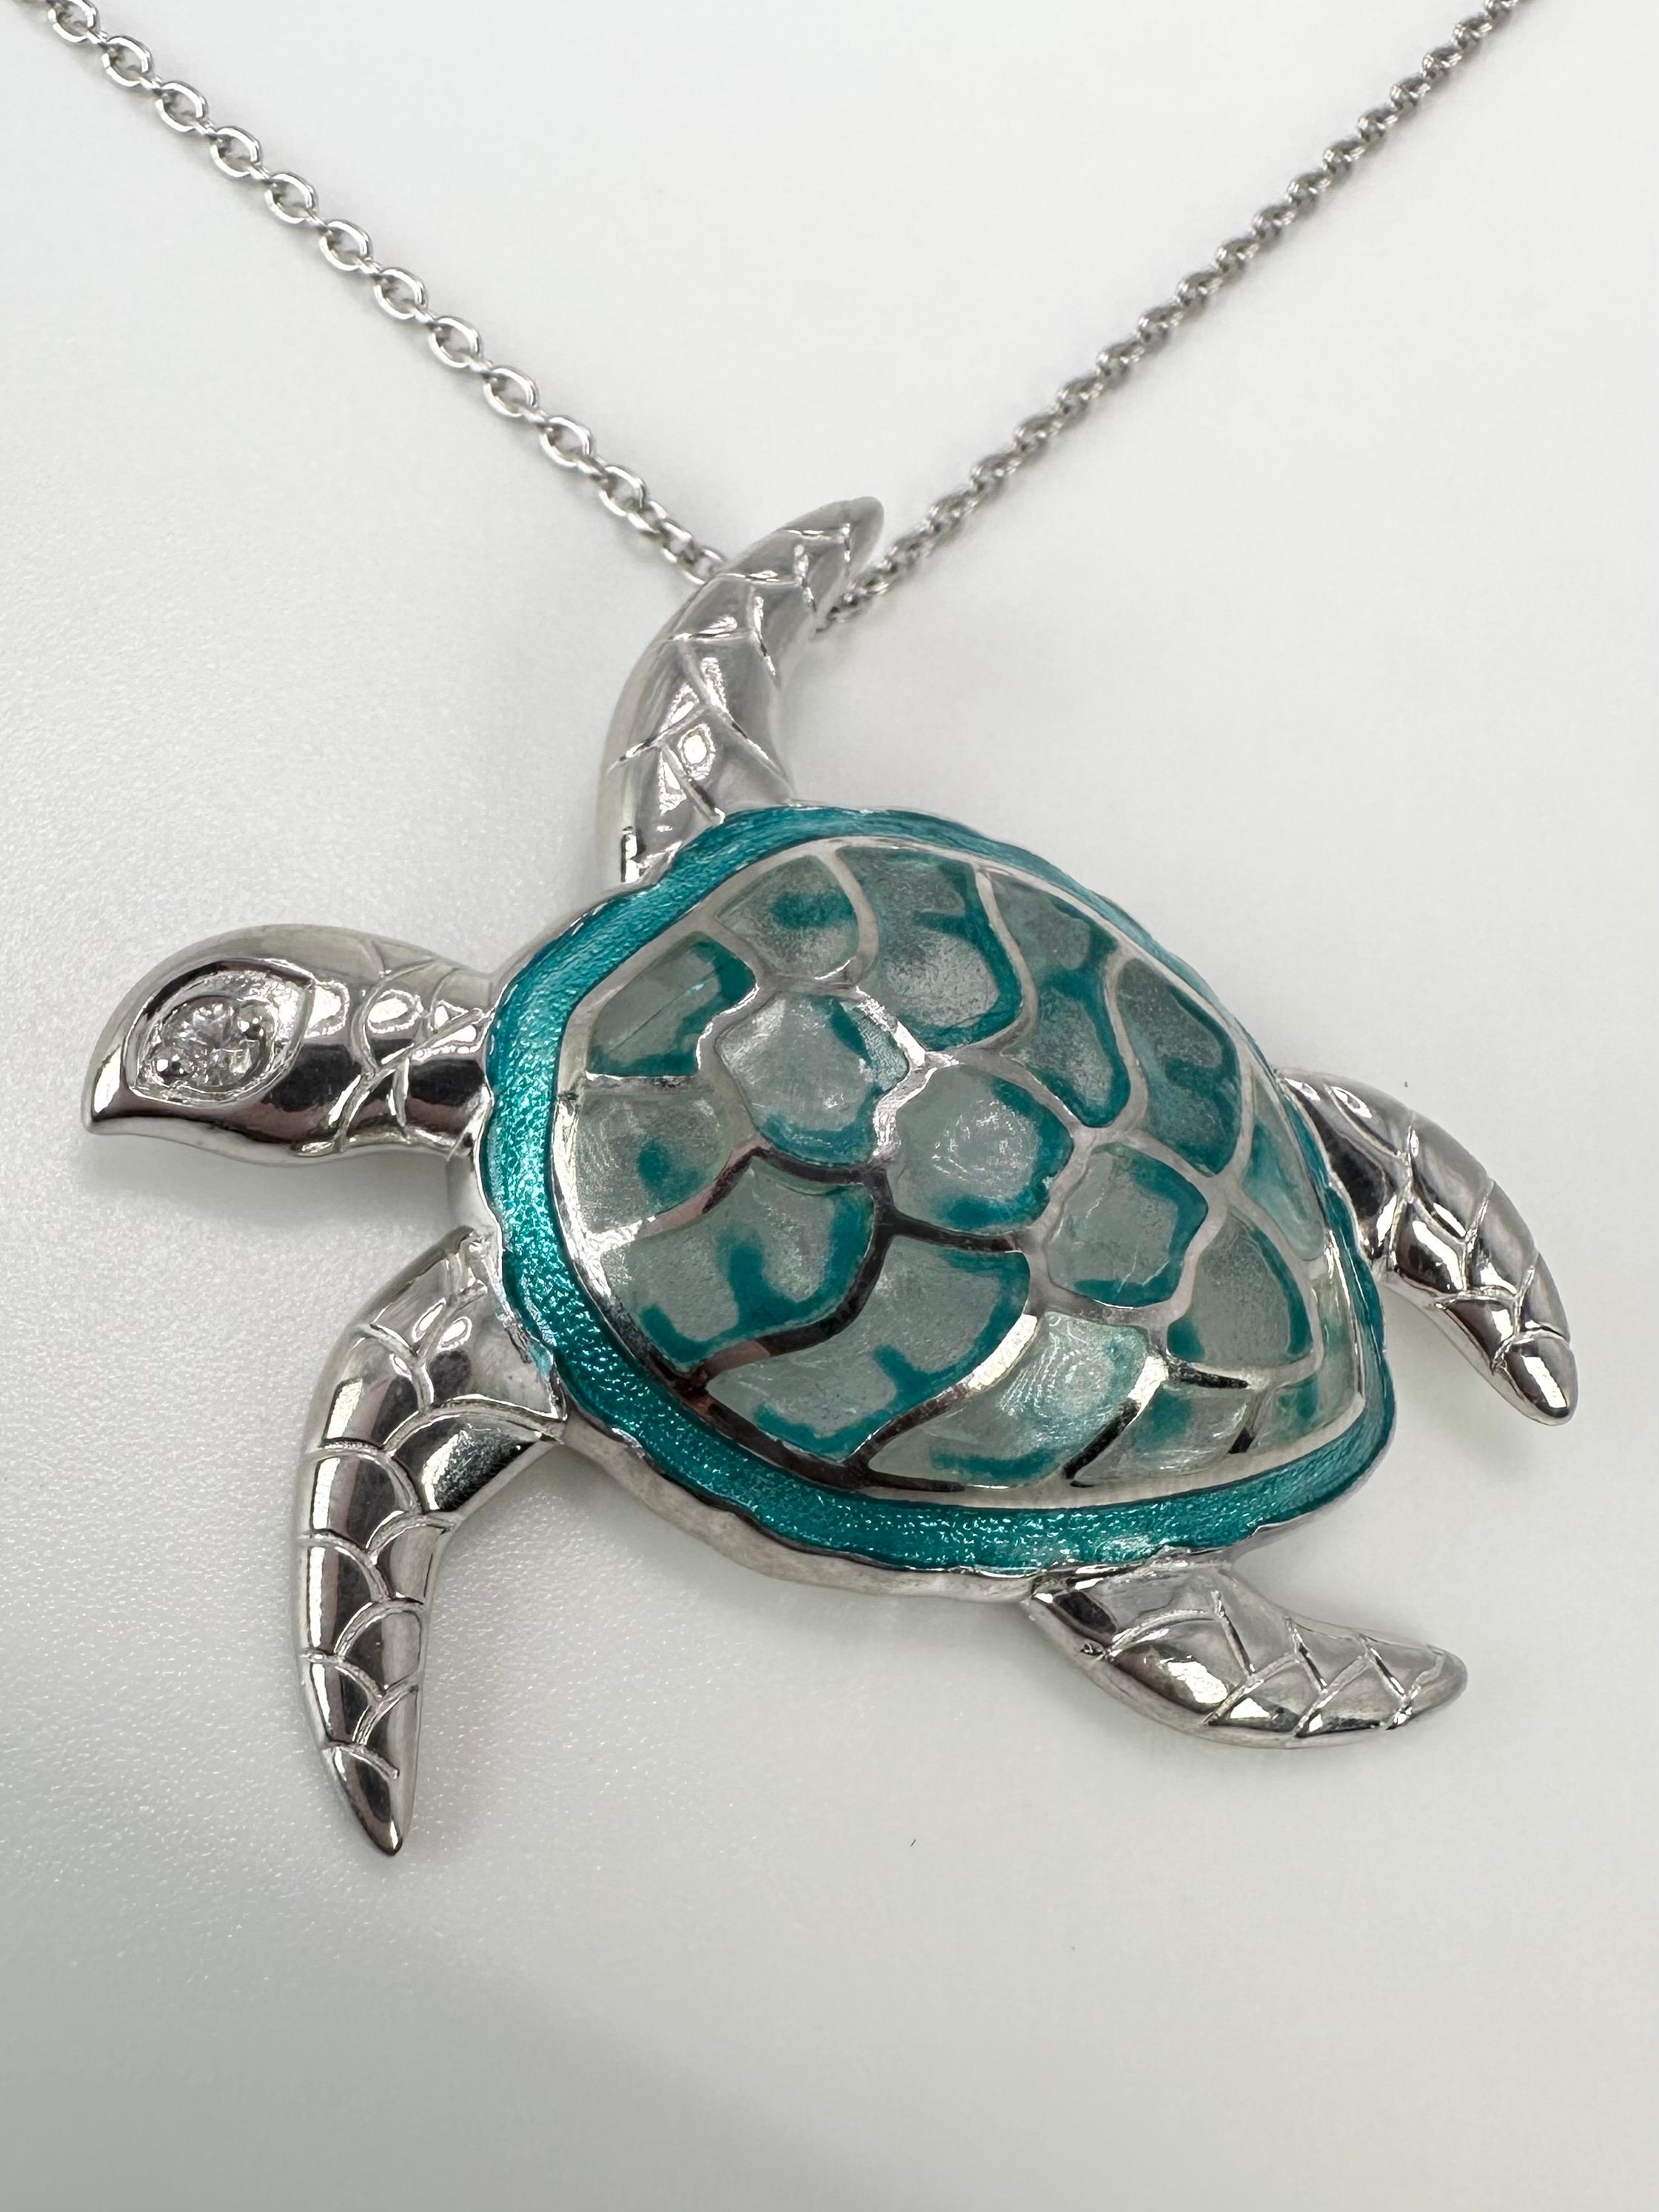 Glass enamel in a unique presentation and design, using array of colors that will neve fade. Natural diamond on the eye of thre turtle!
METAL: silver 925
Grams:13
Item: 64000019mkk
Chain included

WHAT YOU GET AT STAMPAR JEWELERS:
Stampar Jewelers,